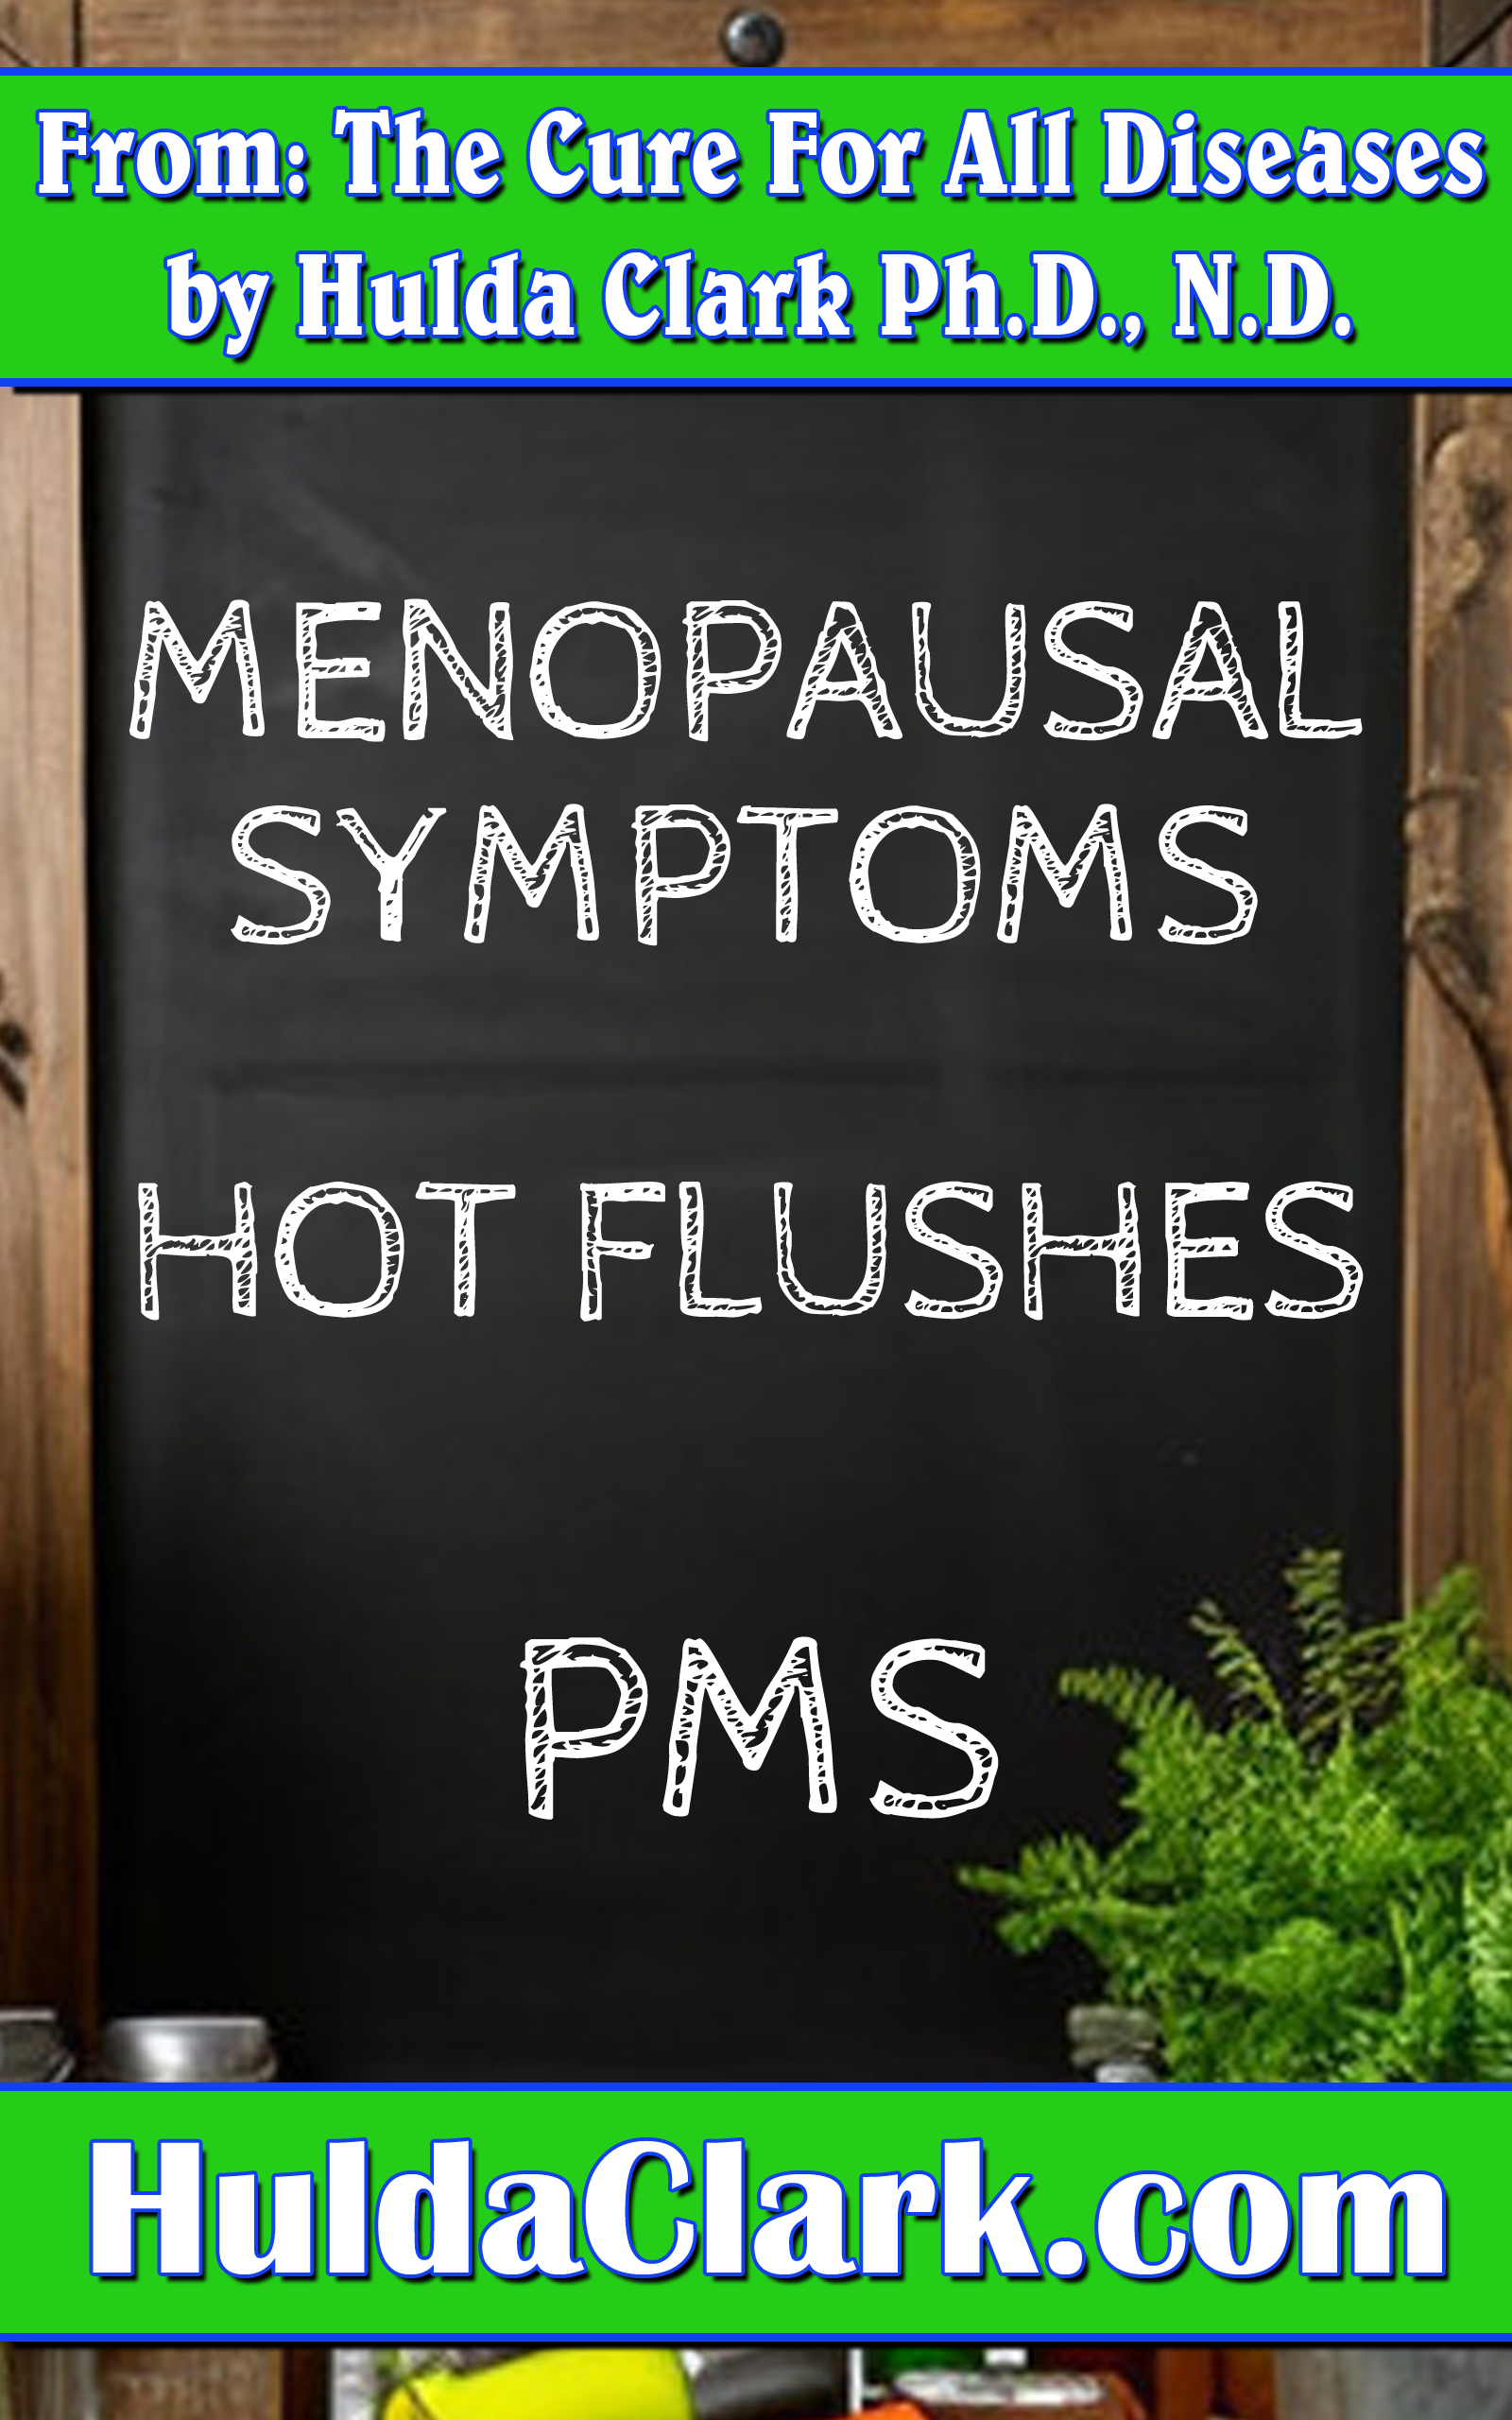 Menopausal Symptoms Hot Flushes PMS Ebook excerpt from The Cure for All Diseases by Hulda Clark